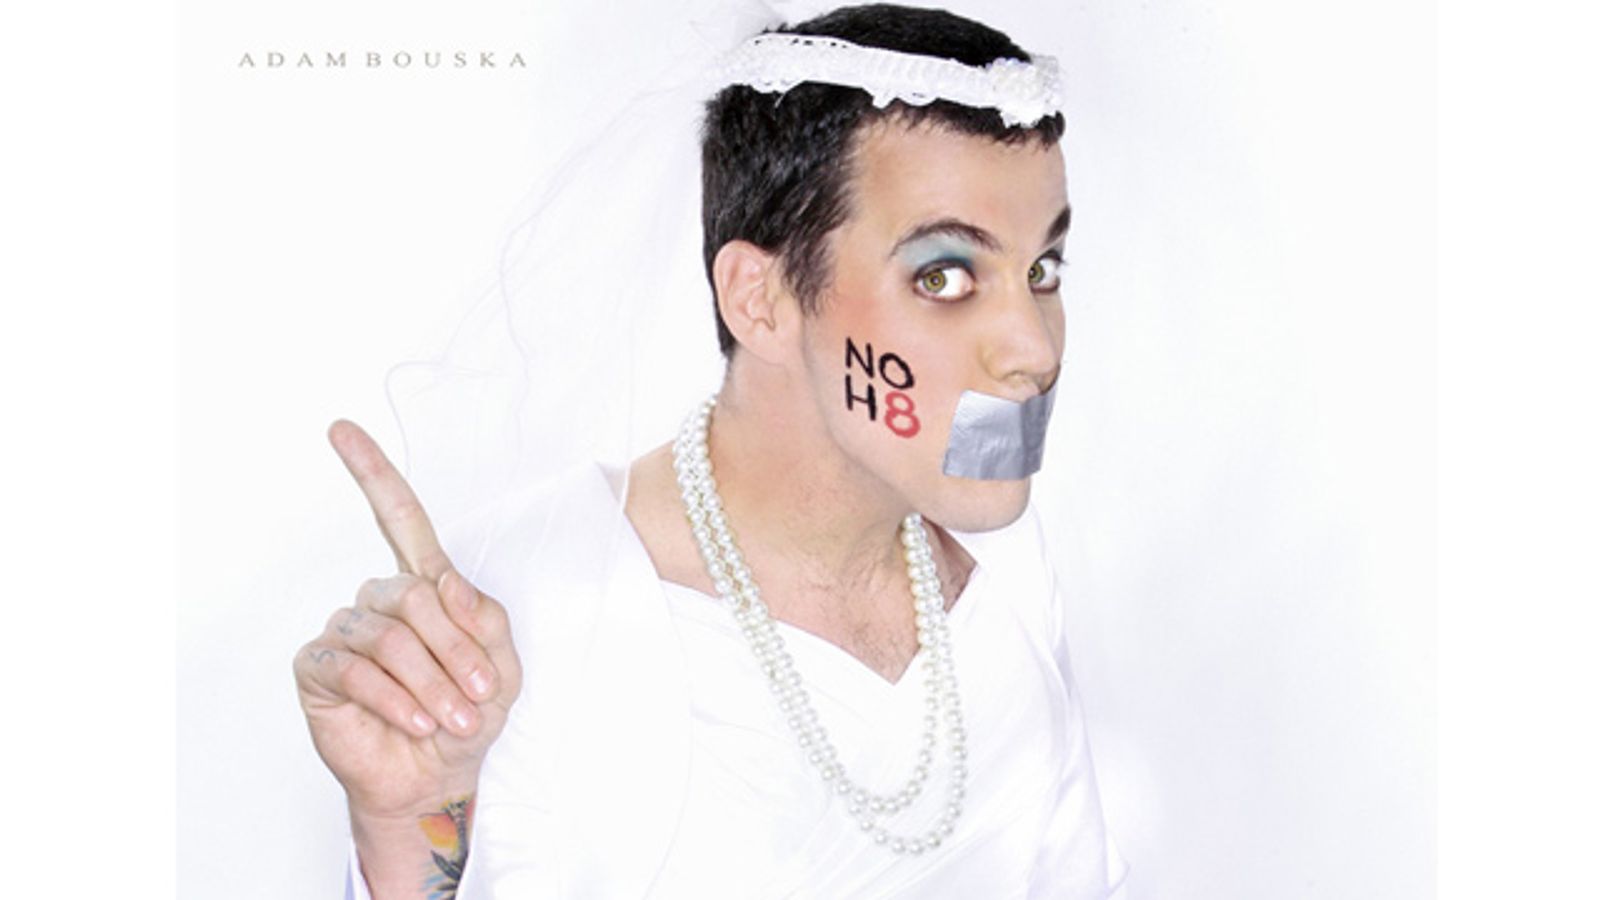 NO H8 Campaign to Host July 15 Photo Shoot